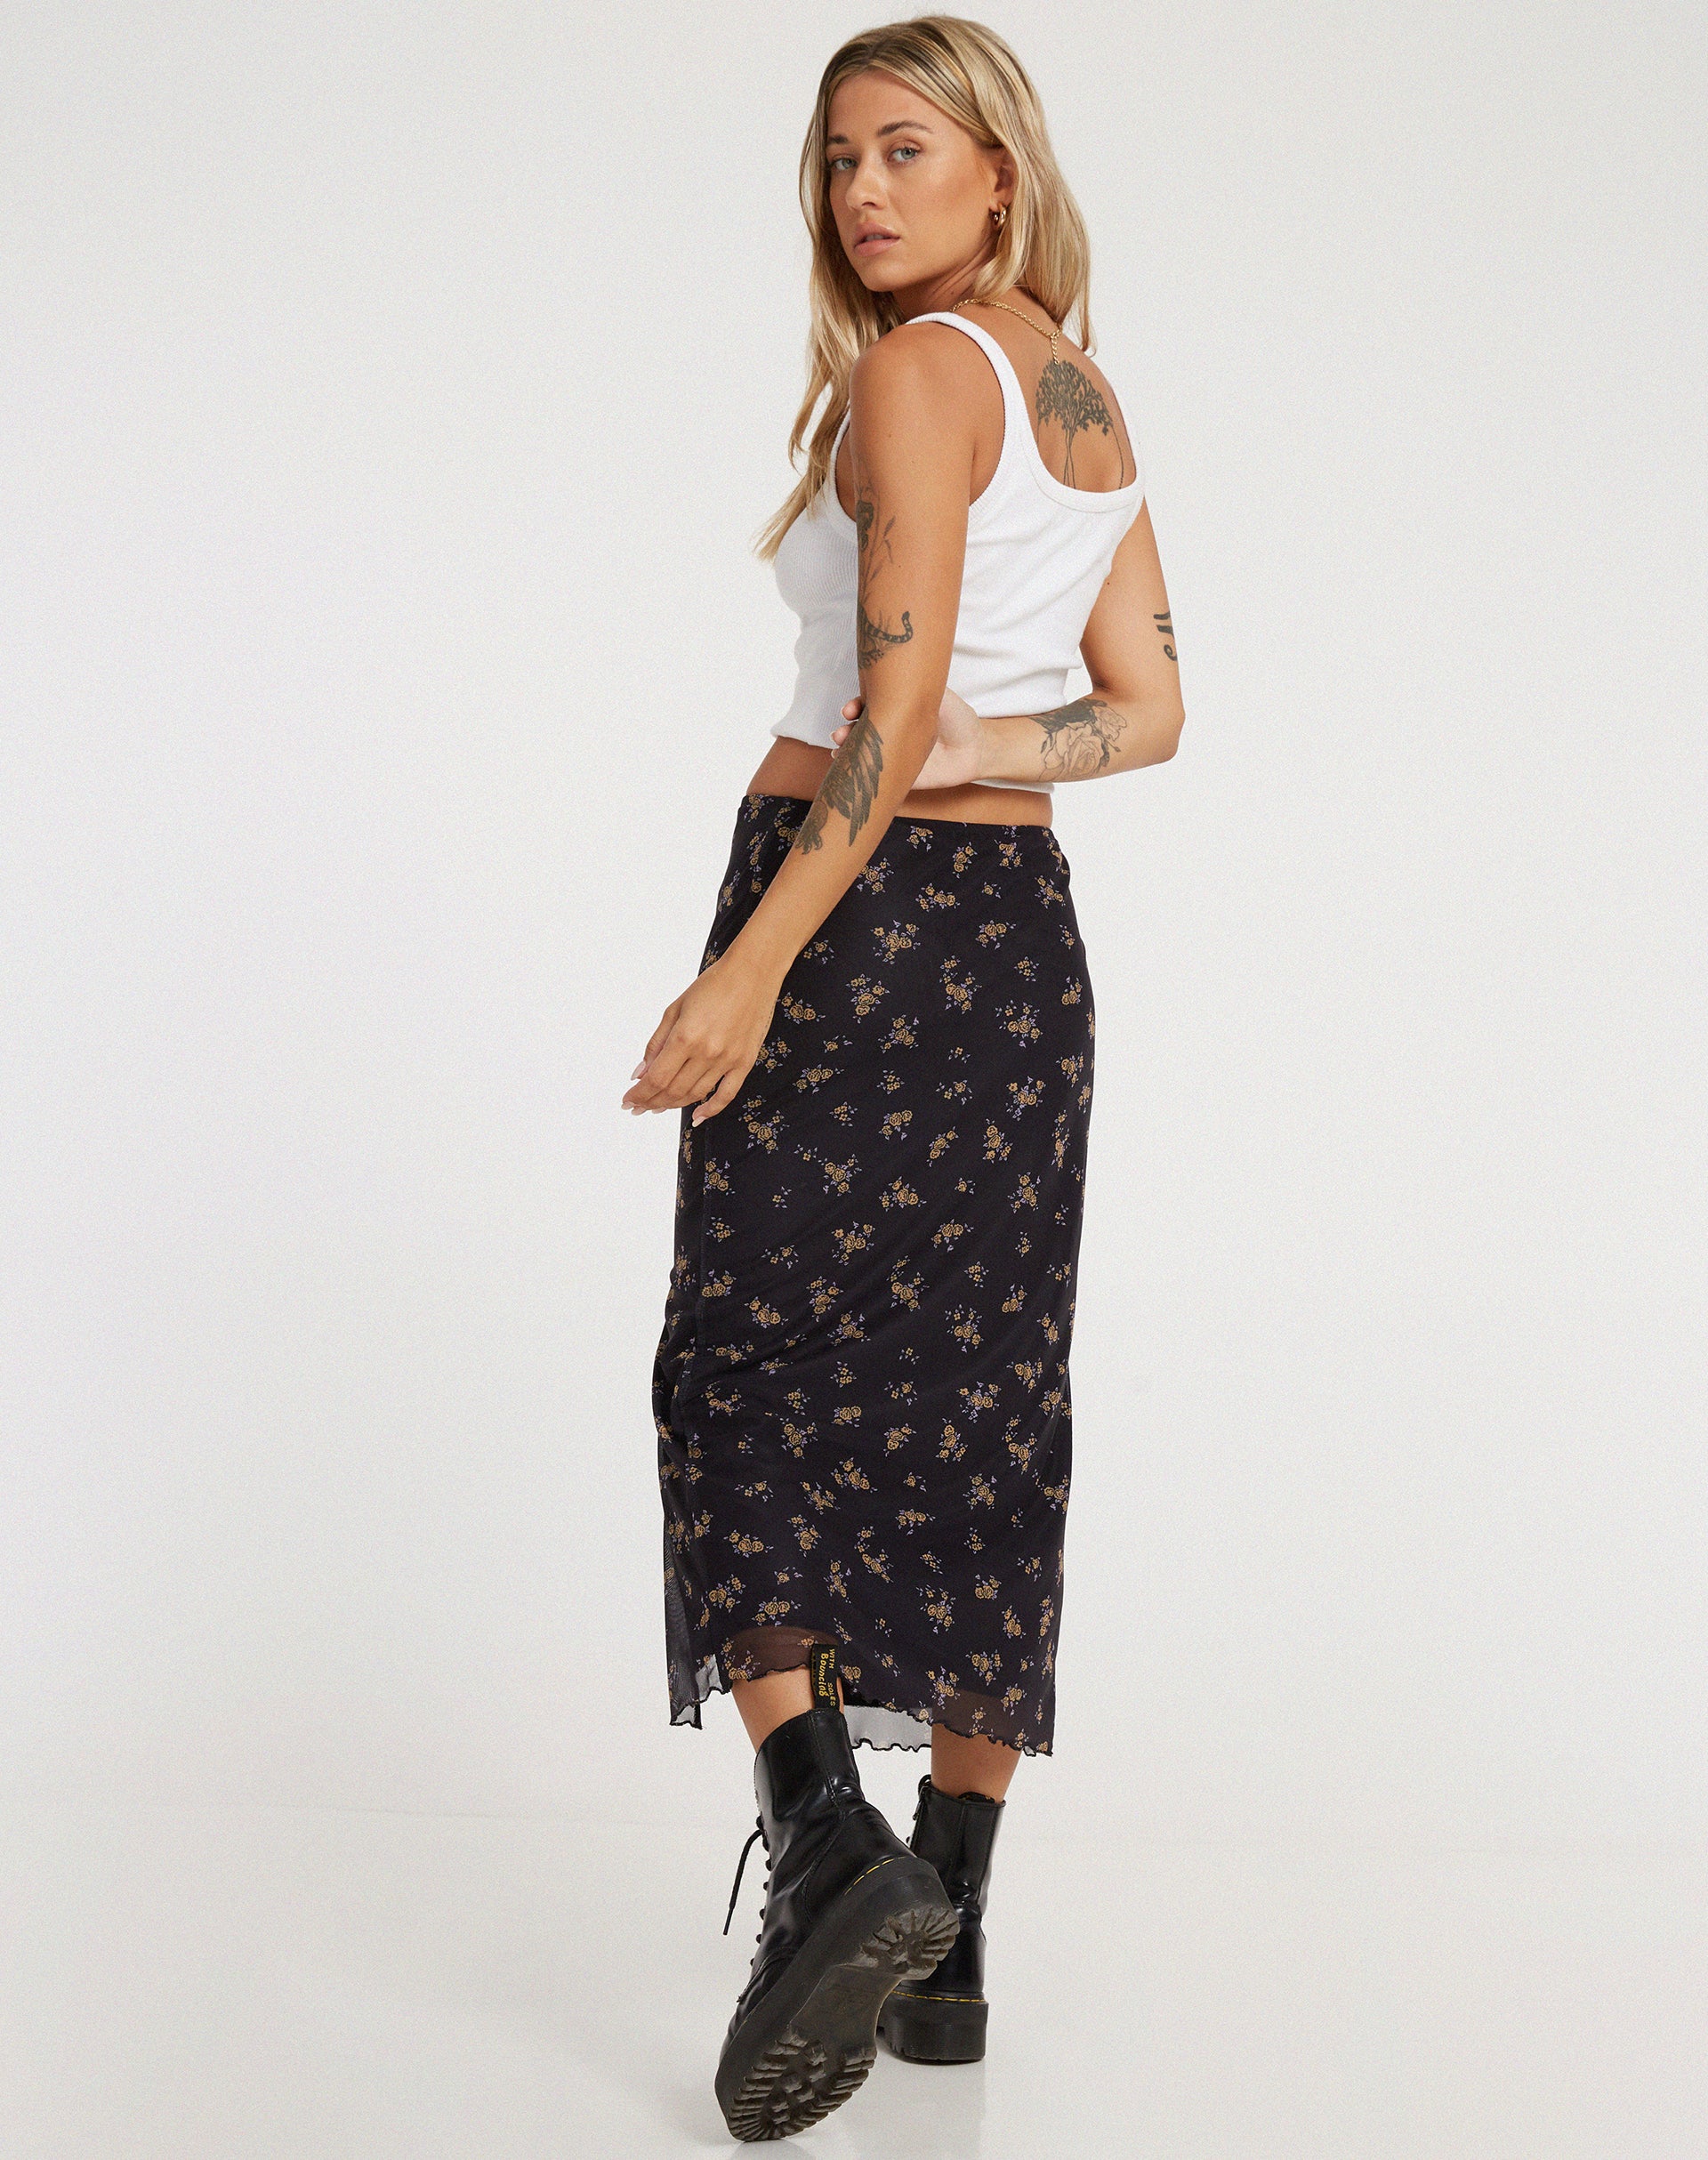 IMAGE OF Rindai Midi Skirt in Femme Floral Black and Gold